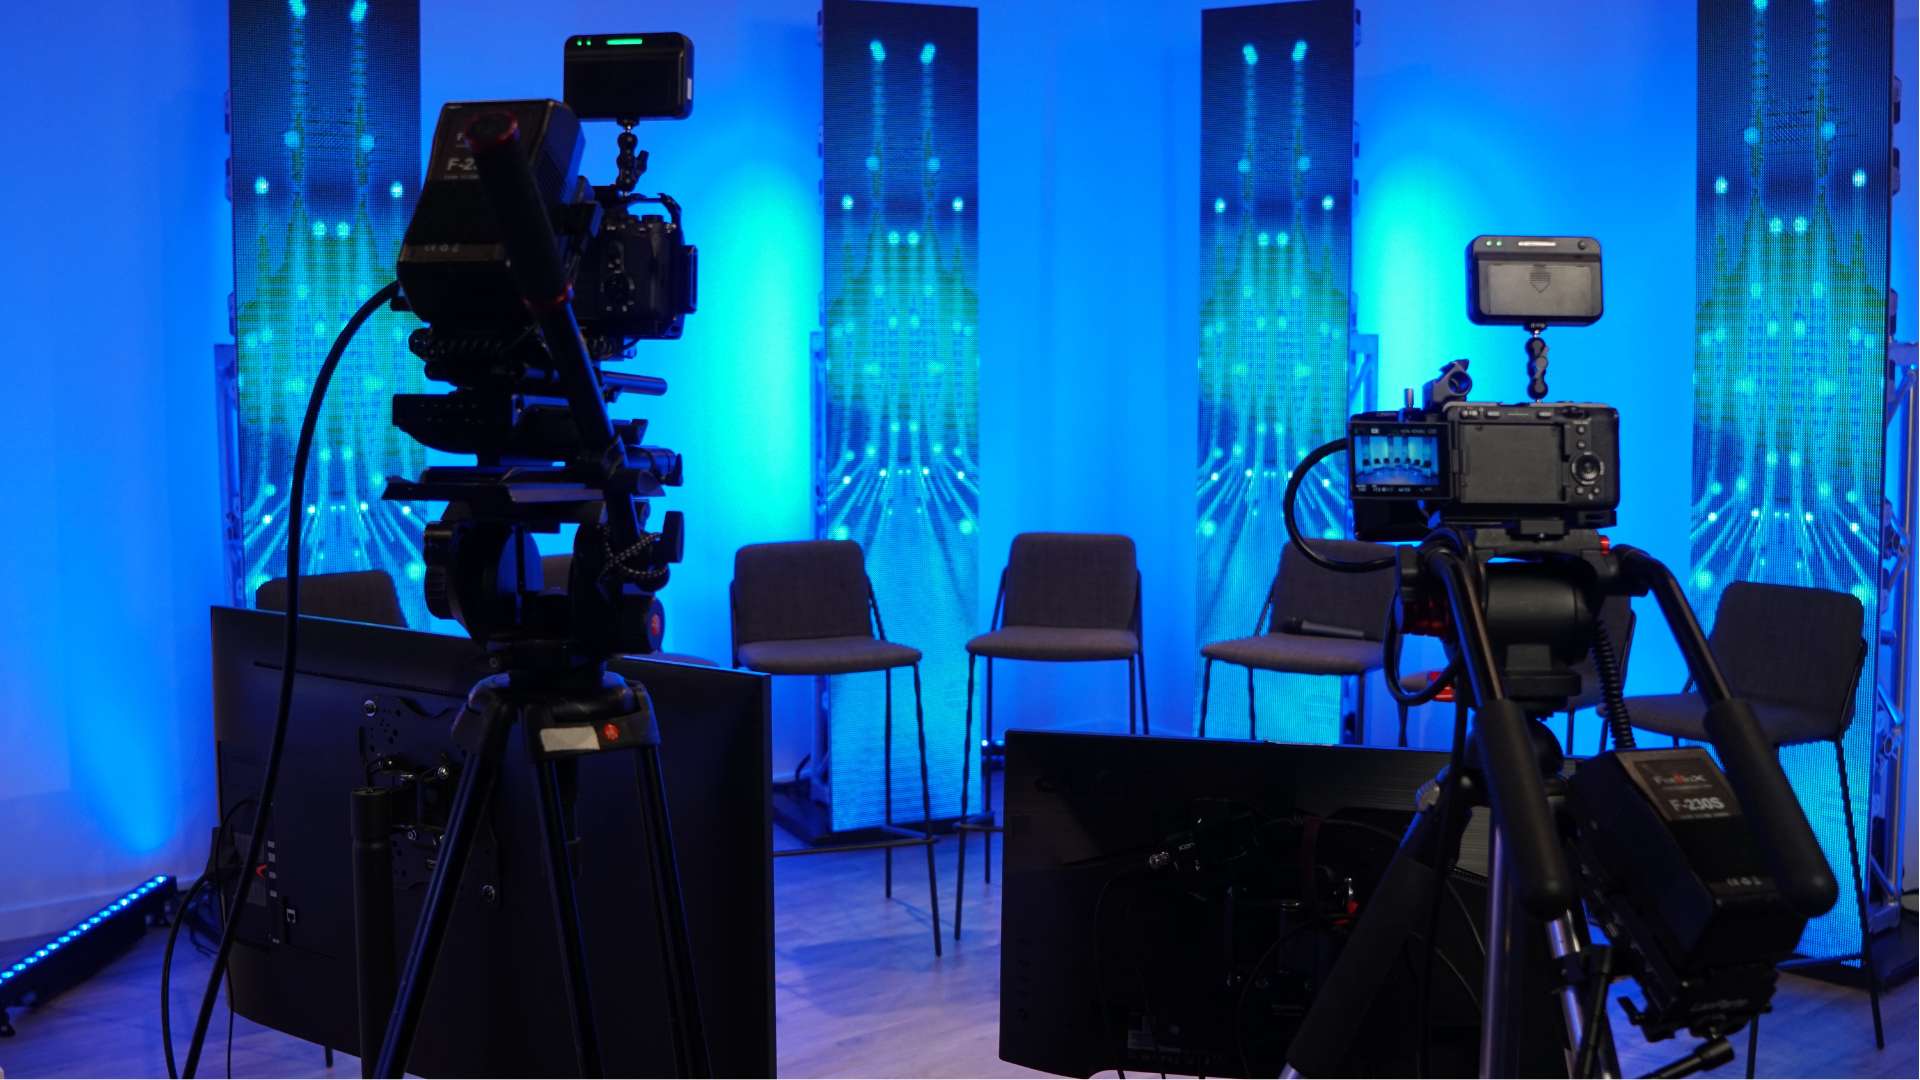 Scene with eight chairs for live panel discussion